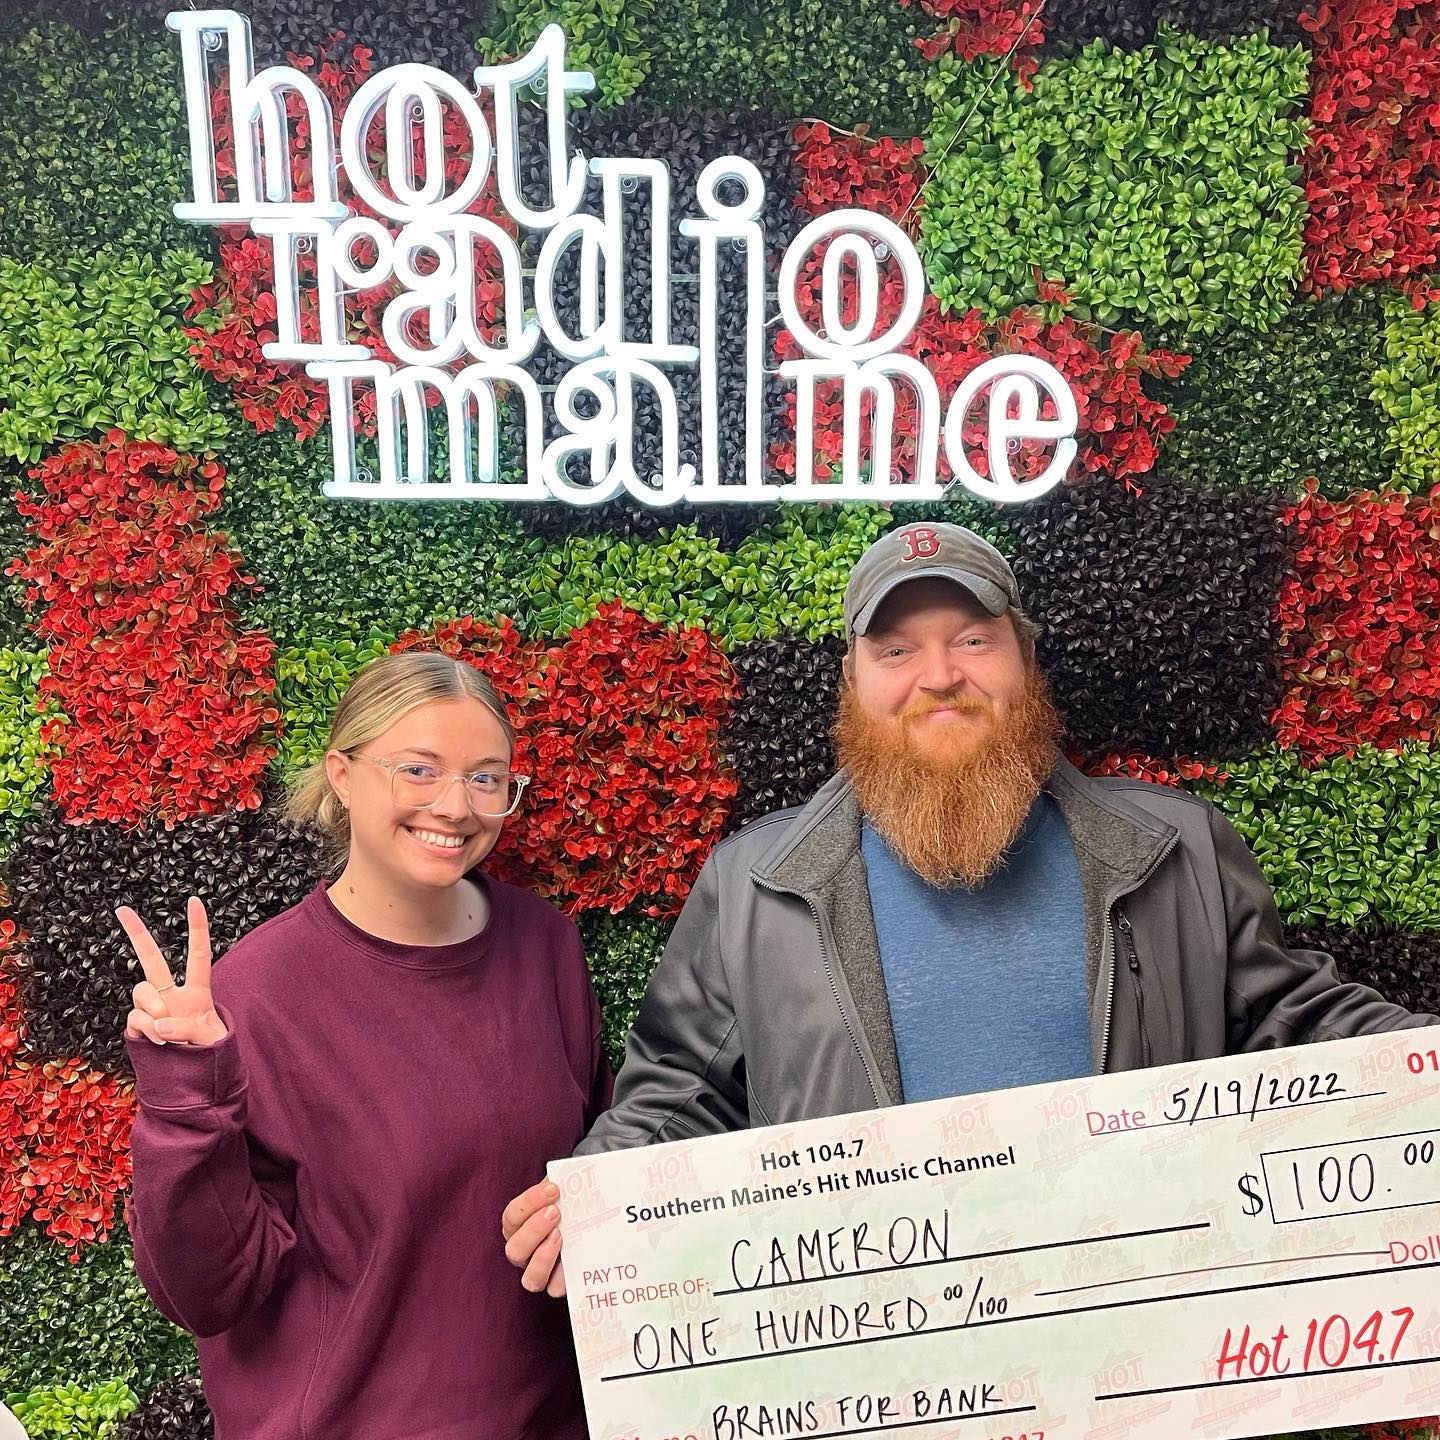 Shout out to Cameron from Waterboro - He just picked up his $100 #BrainsForBank prize! Next chance to play is coming up at 5pm with @aullthat & itâ€™s made Hot in Maine by @leeautomalls ðŸ§ ðŸ¦#MaineMadeWinners